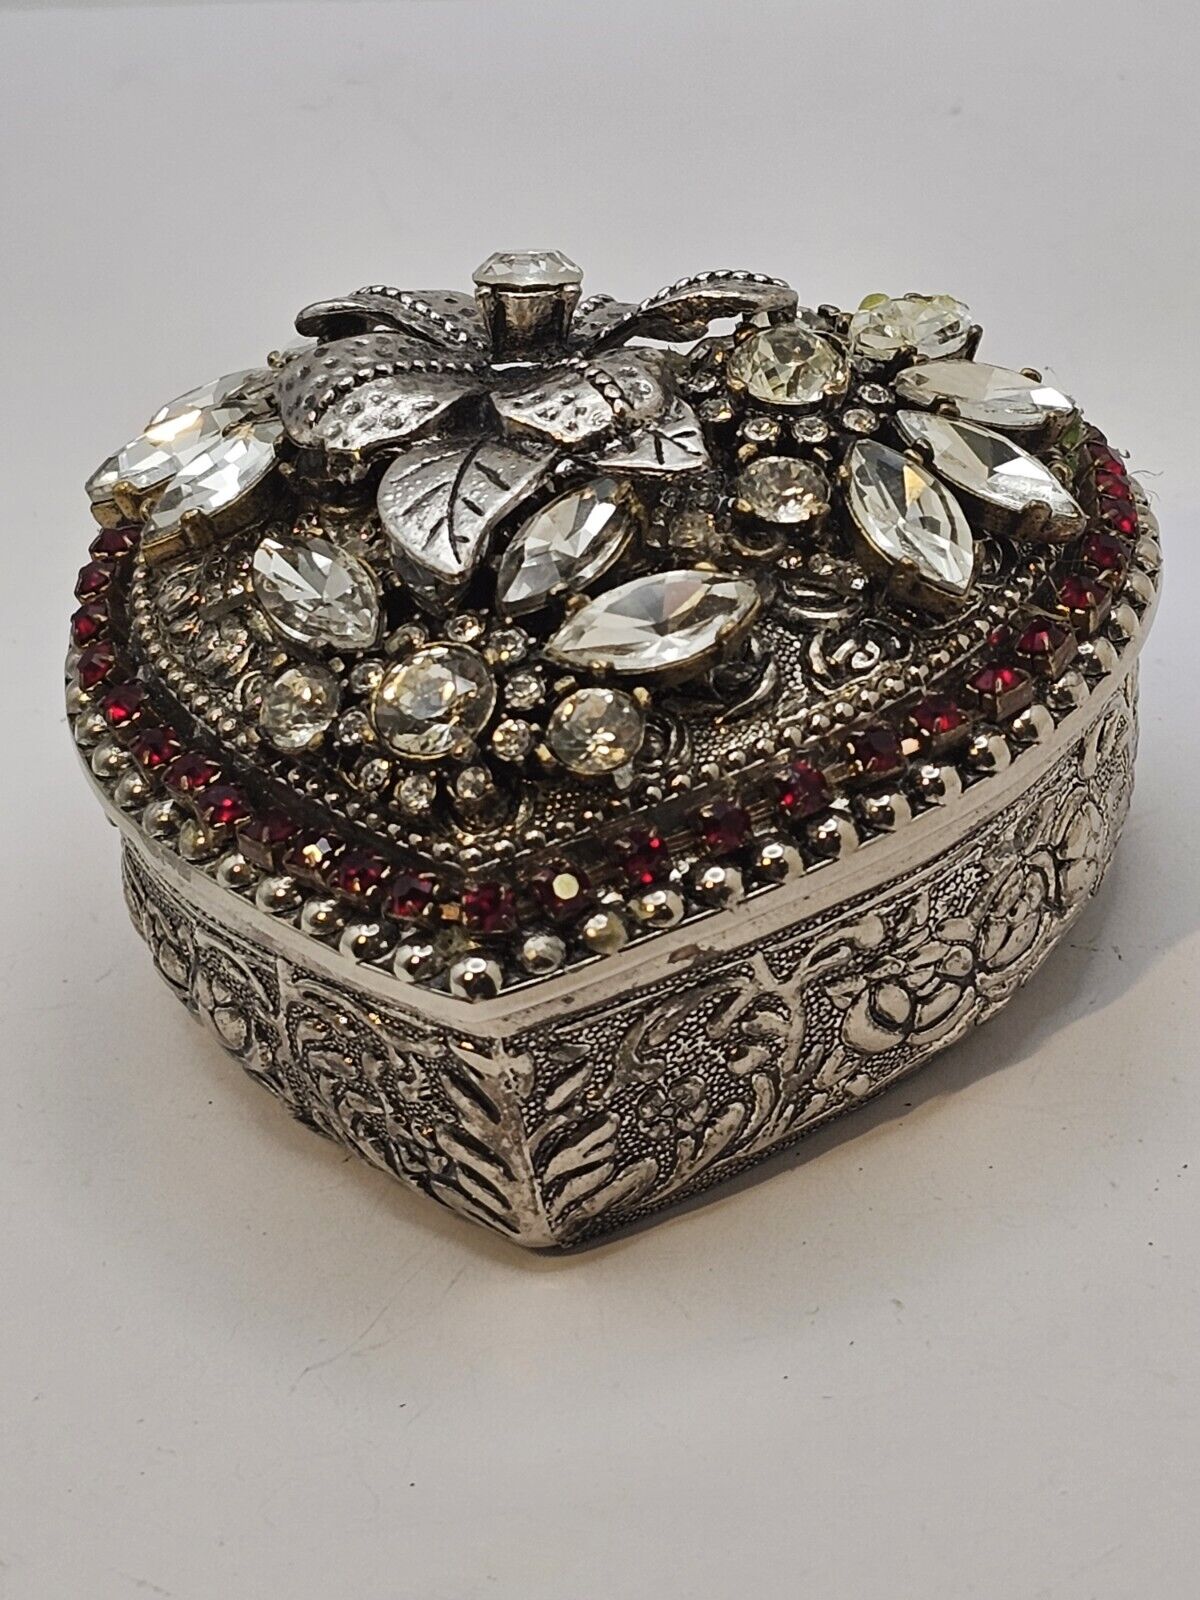 Vintage Trinket Box HEART Silver Plated Mixed Media Jewelry Art OOAK Mother Gift